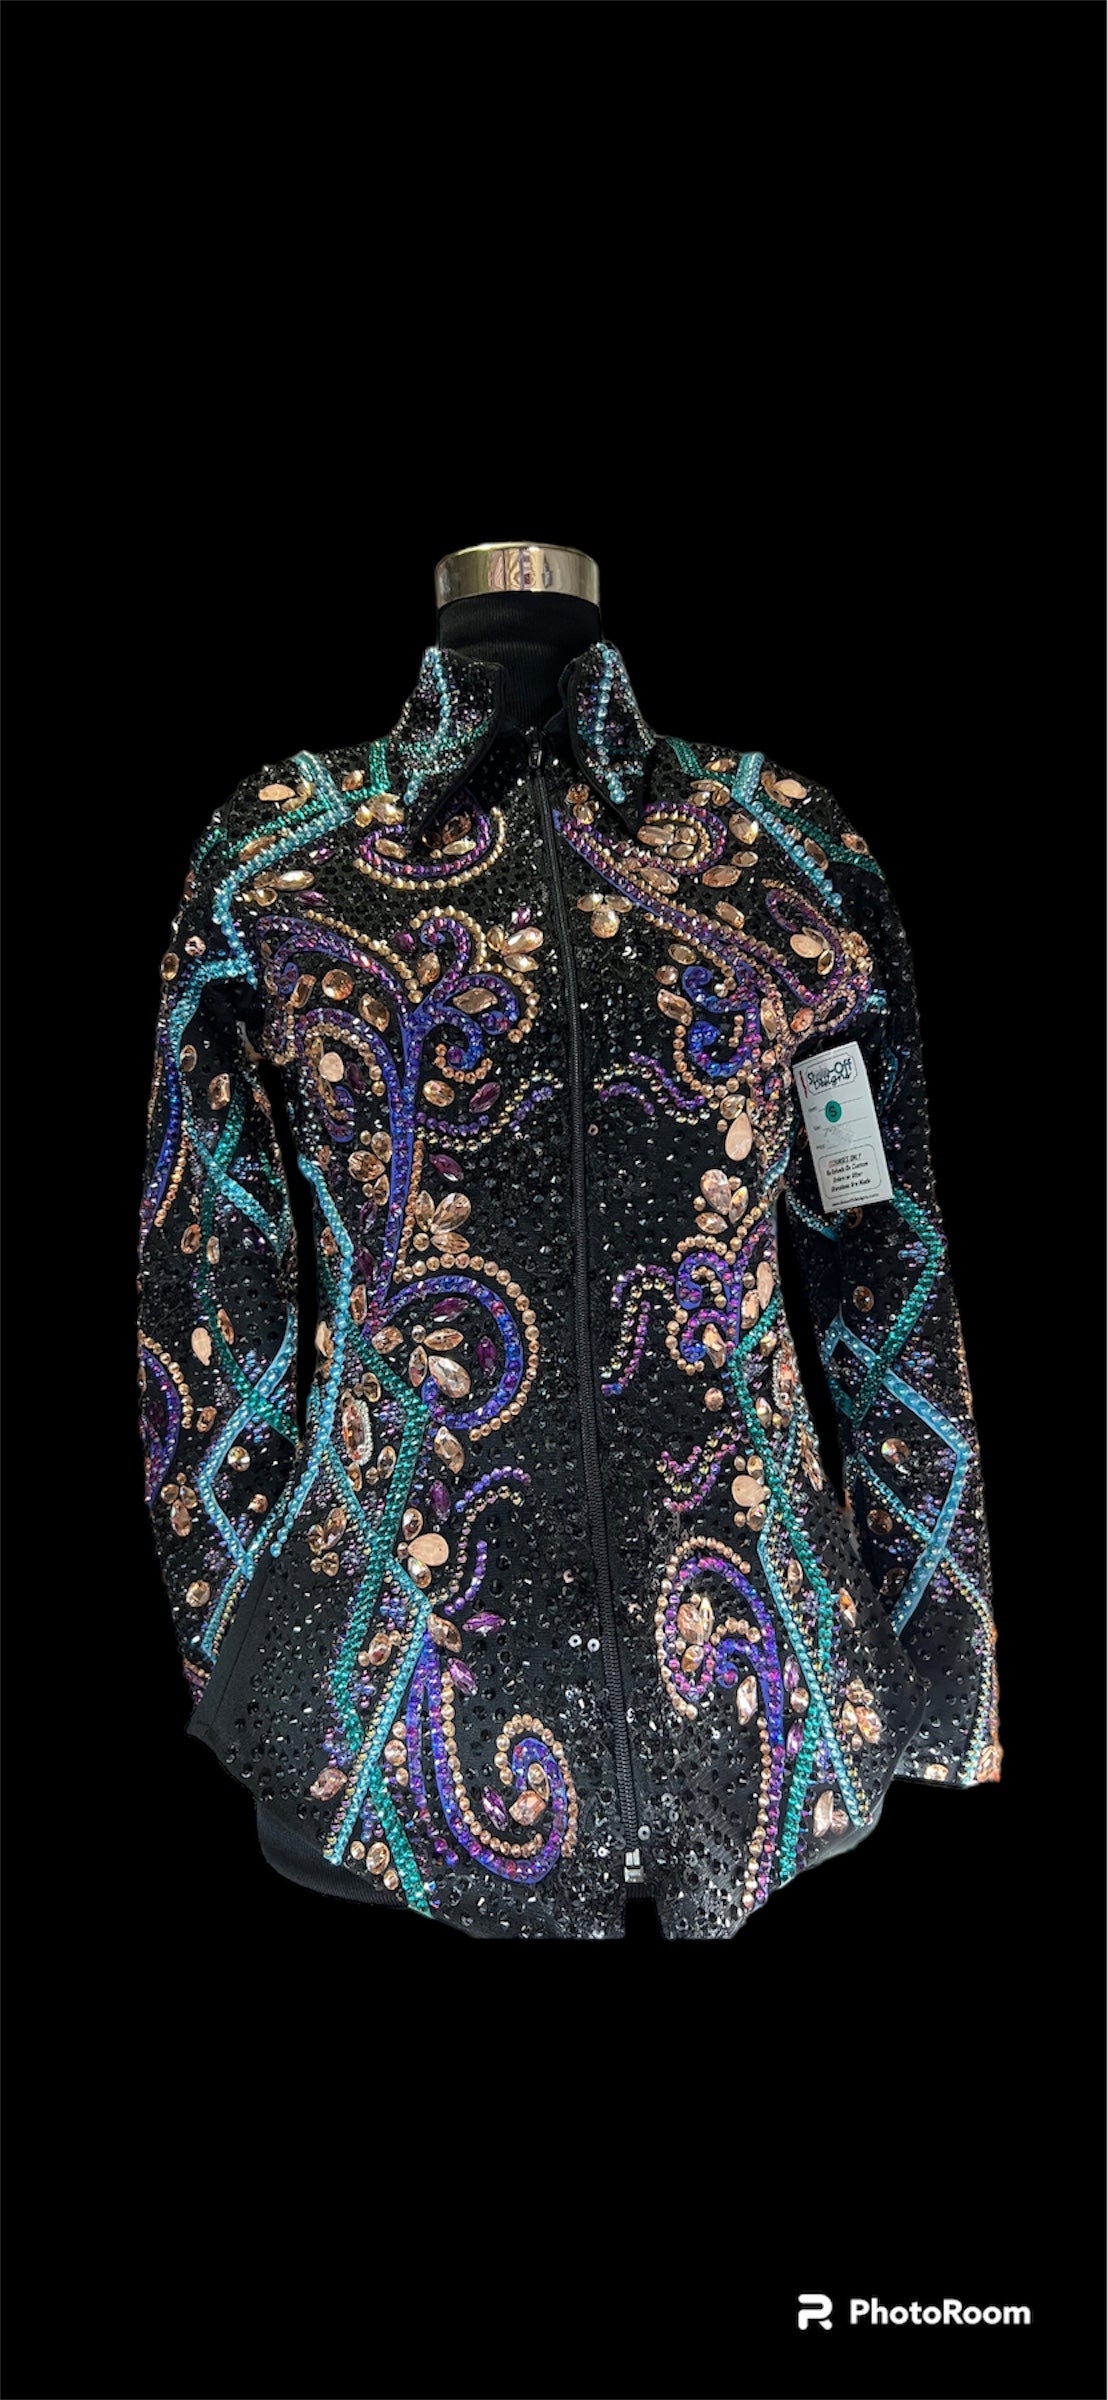 Small Showmanship Jacket. Black with purple, rose gold, teal.